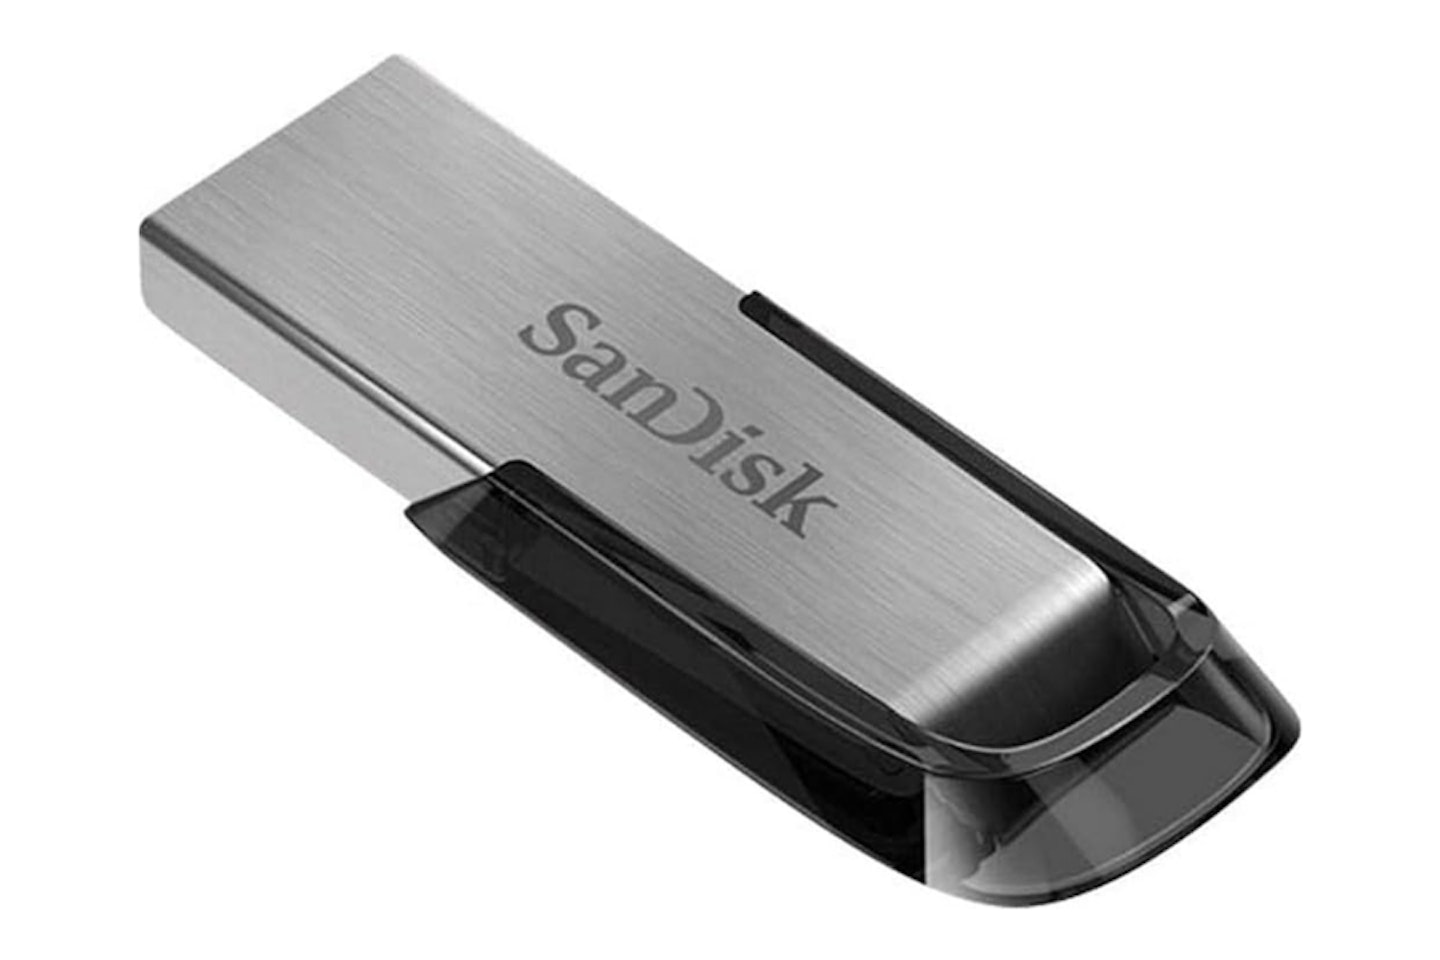 SanDisk 128GB Ultra Flair USB 3.0 Flash Drive - one of the best SanDisk USB stick devices